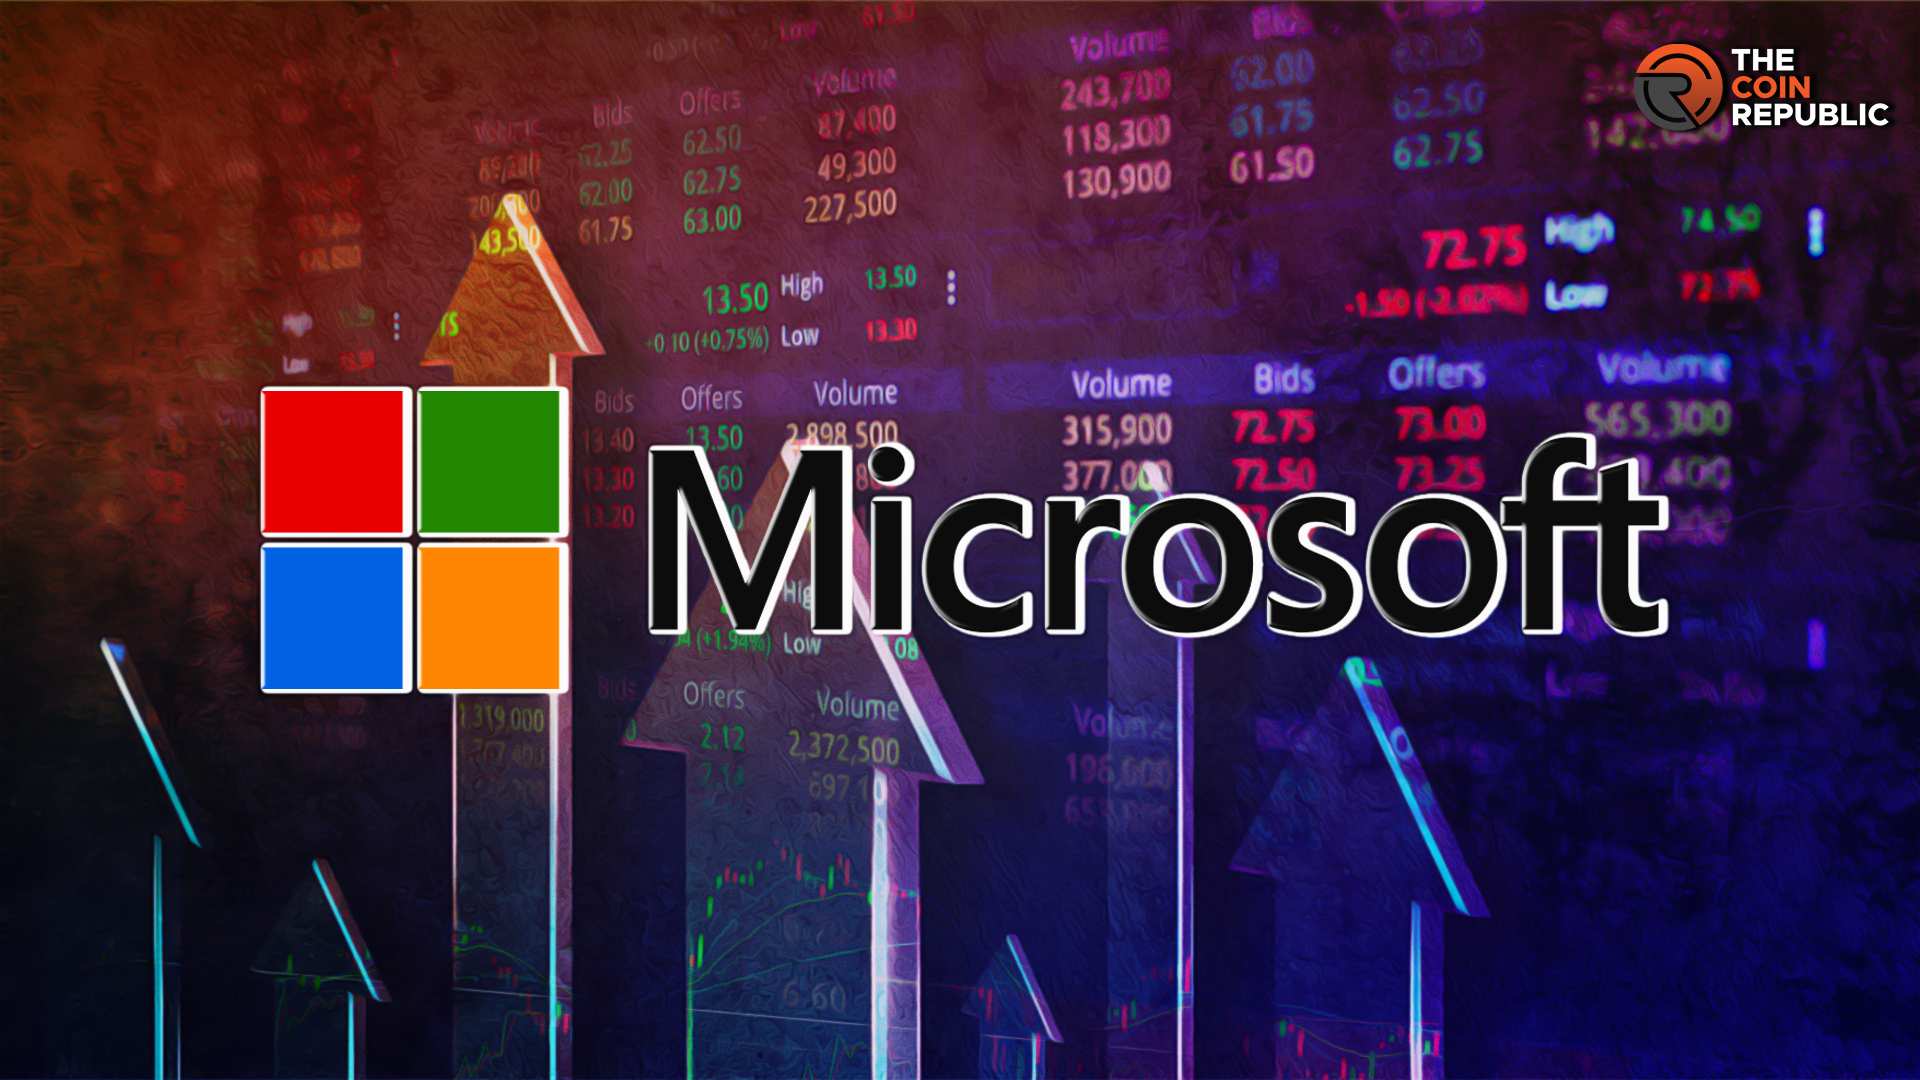 Microsoft Corp. (MSFT) Stock: MSFT Stock Dips; Good Time To Buy?